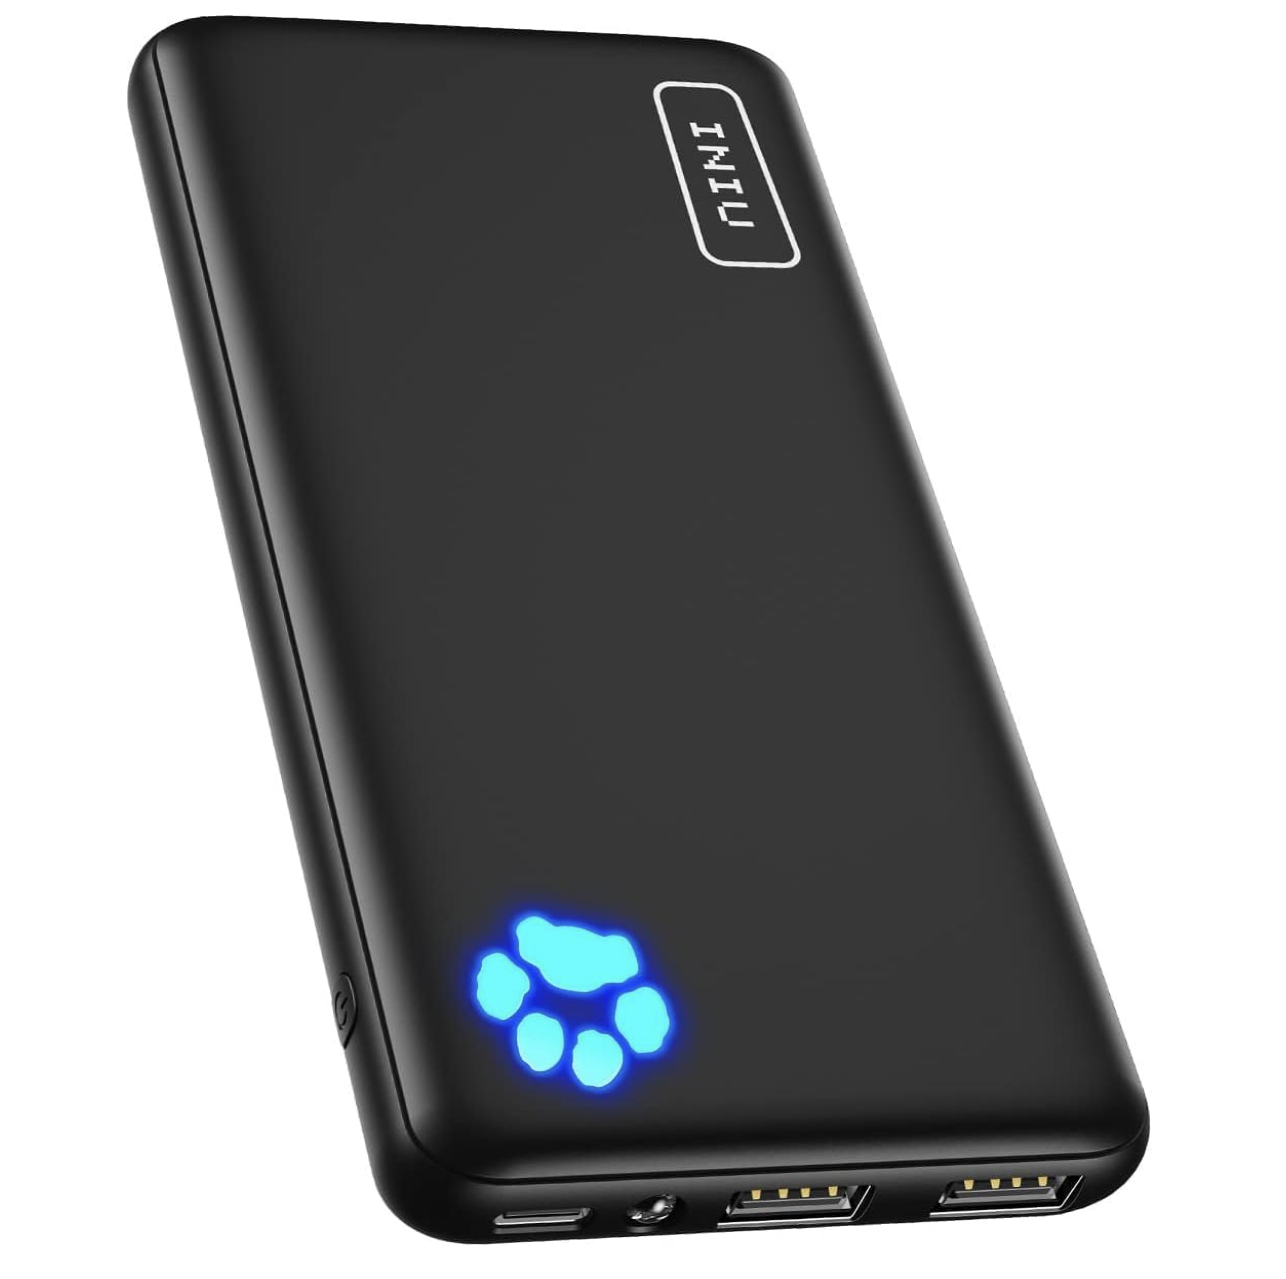 Best Portable Charger Under $20